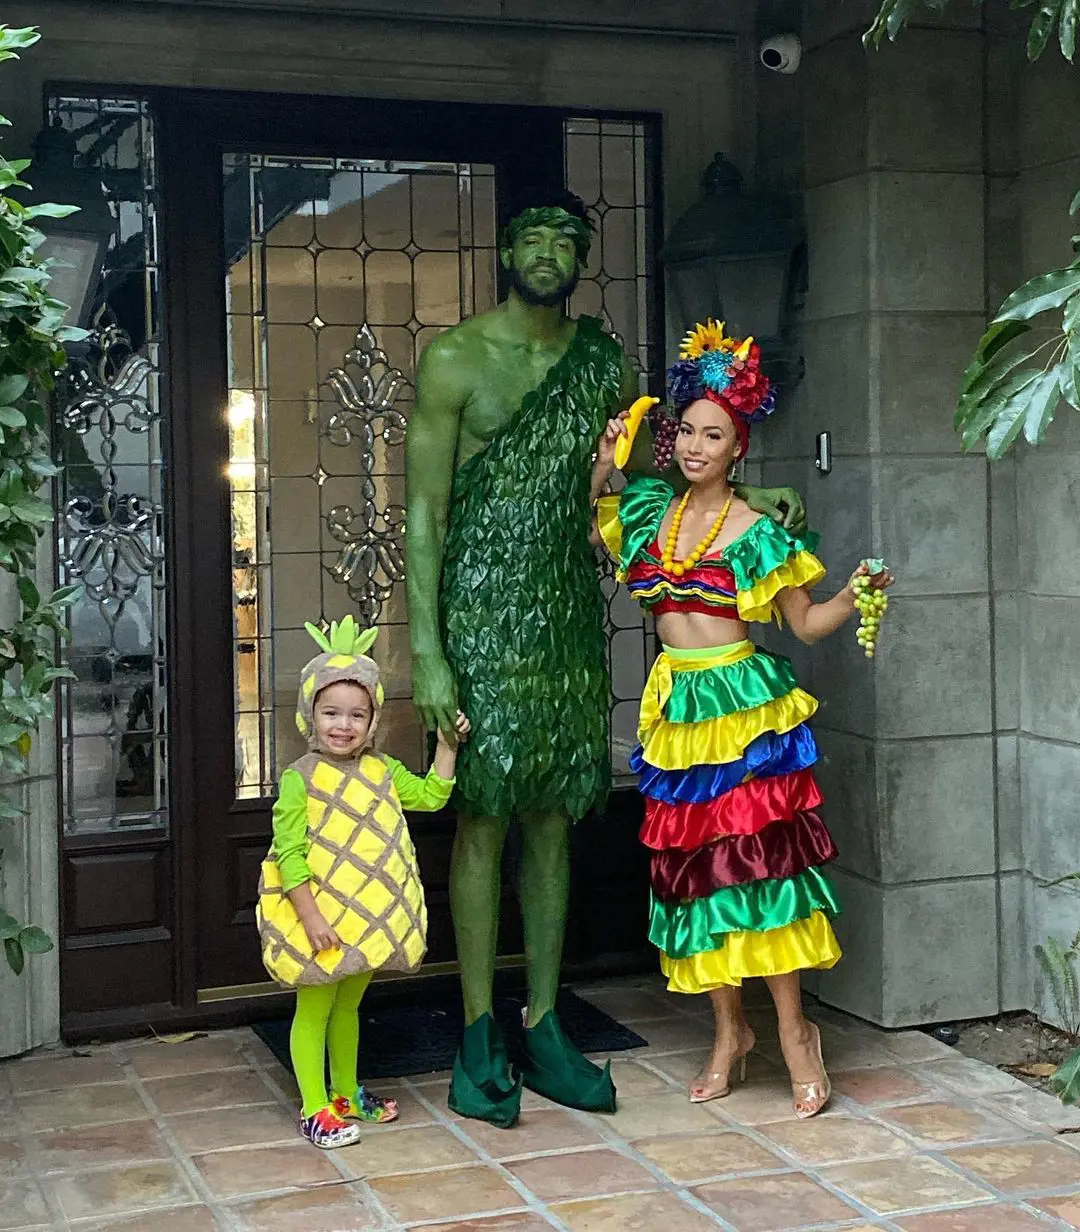 Jayale and Giselle wearing enronment theme costume for the Halloween party in October 2019. Jayale became Jolly Green Giant and Giselle wore Chiquita Banana outfit